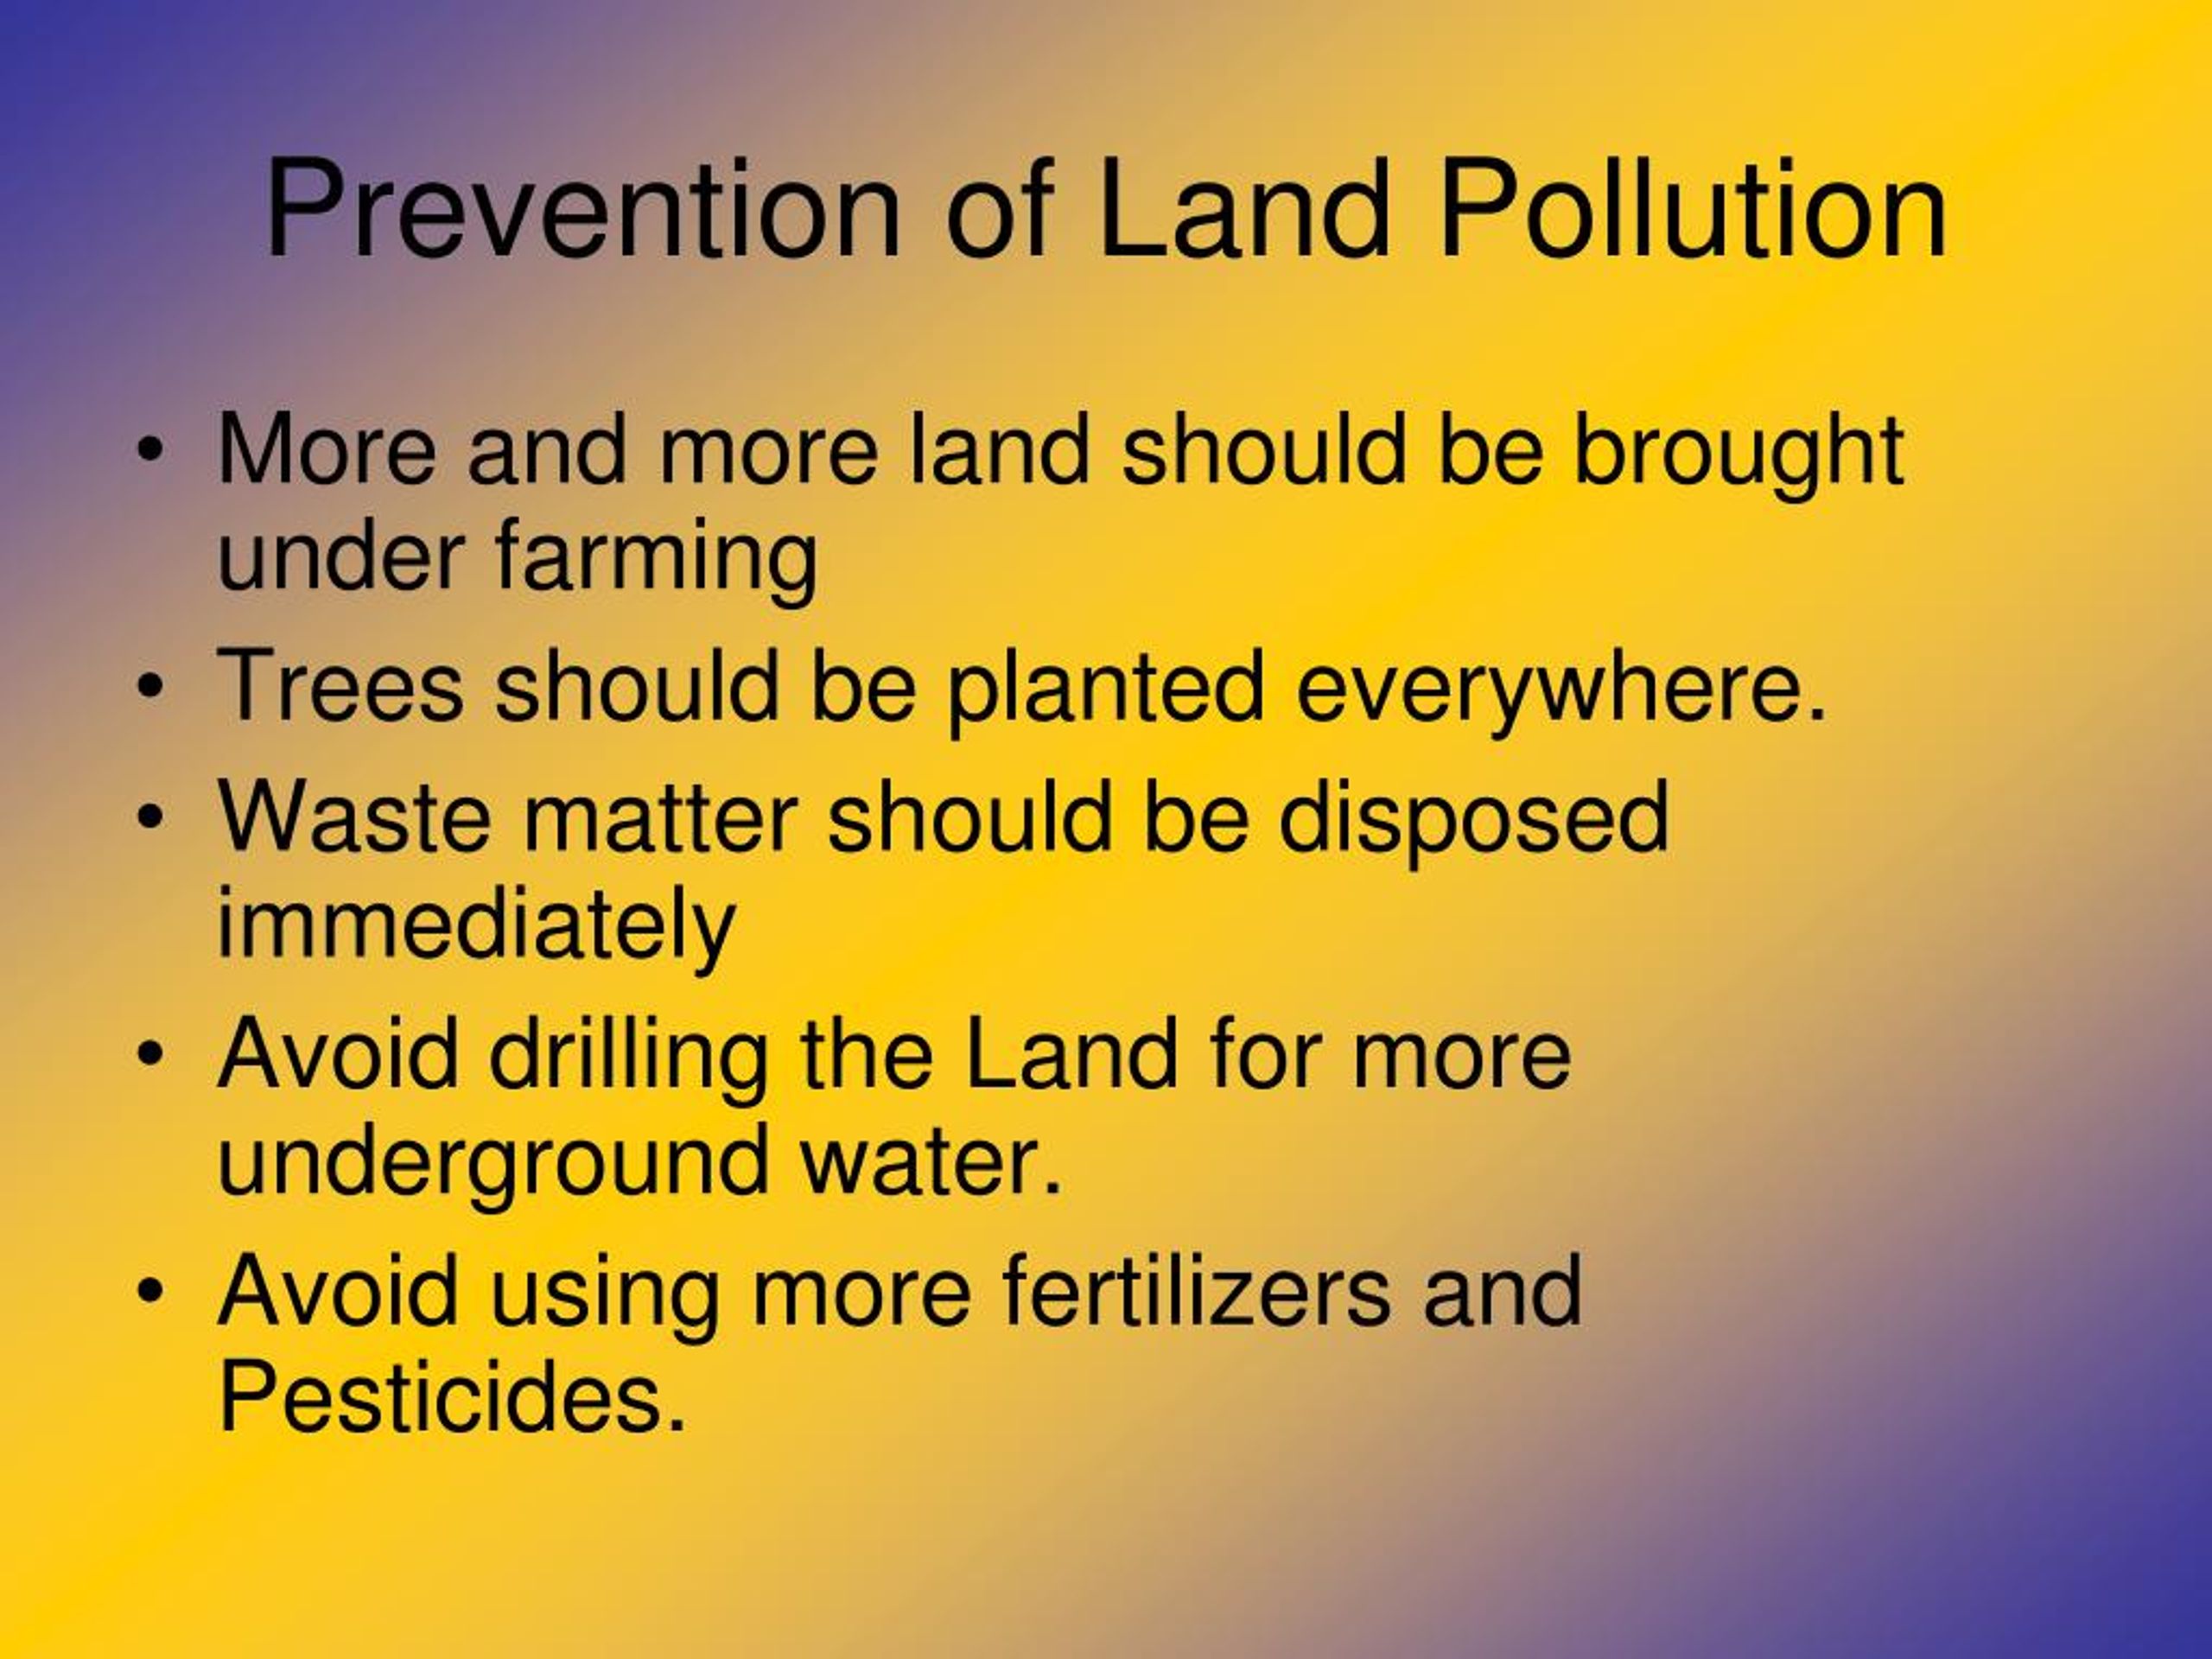 prevention of land pollution essay